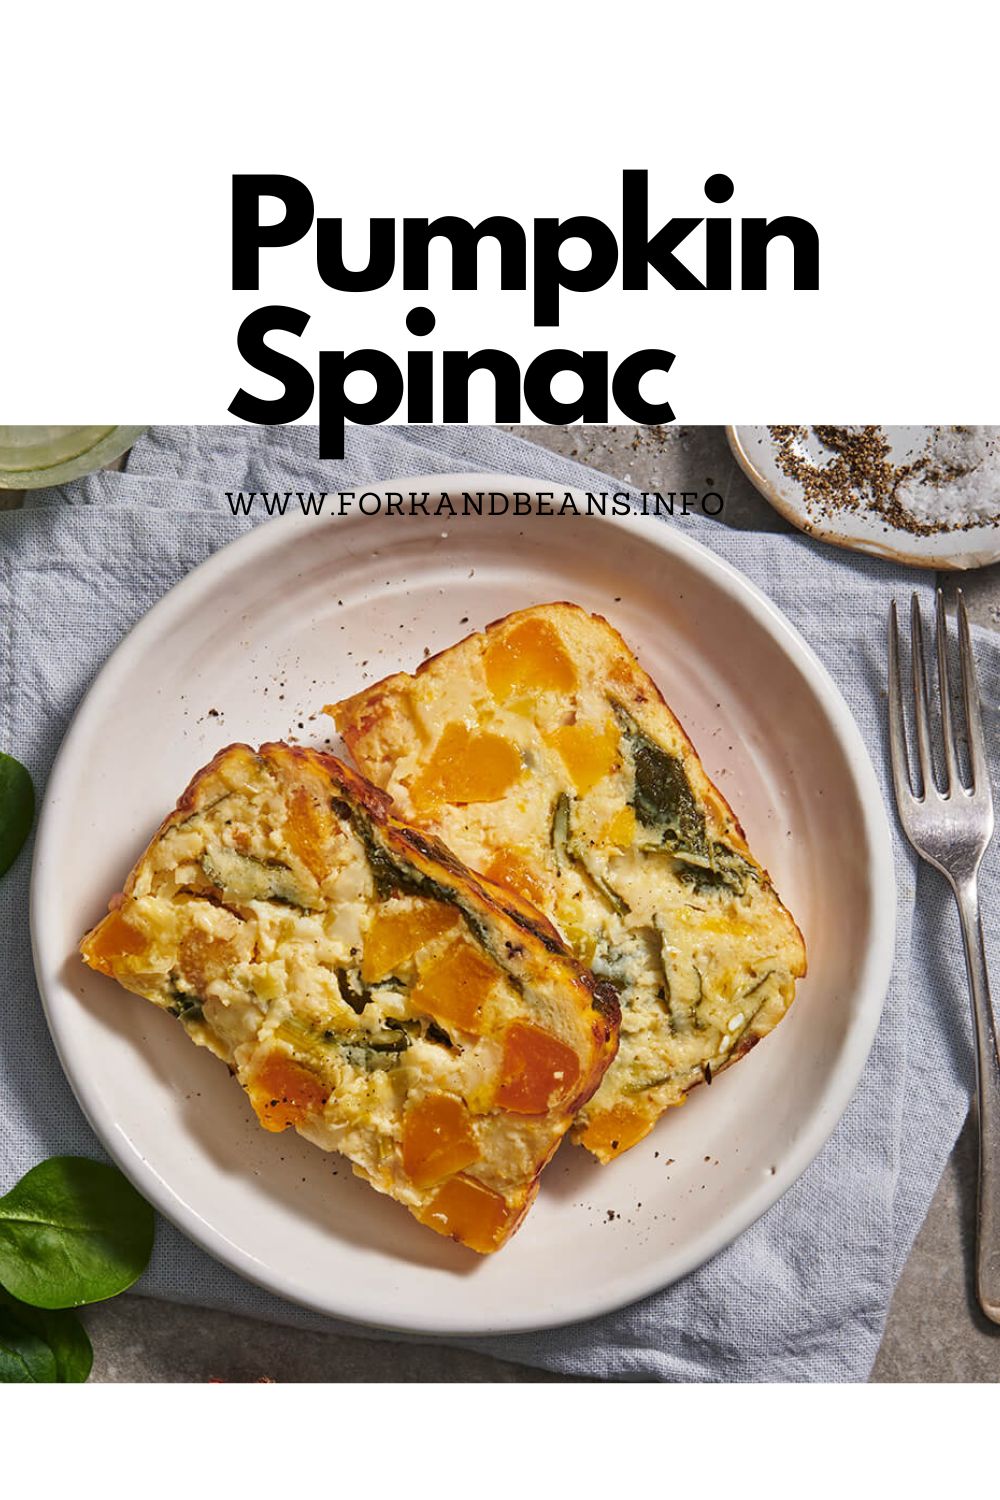 Pumpkin, Spinach, Cheese & Chive Savory Scones